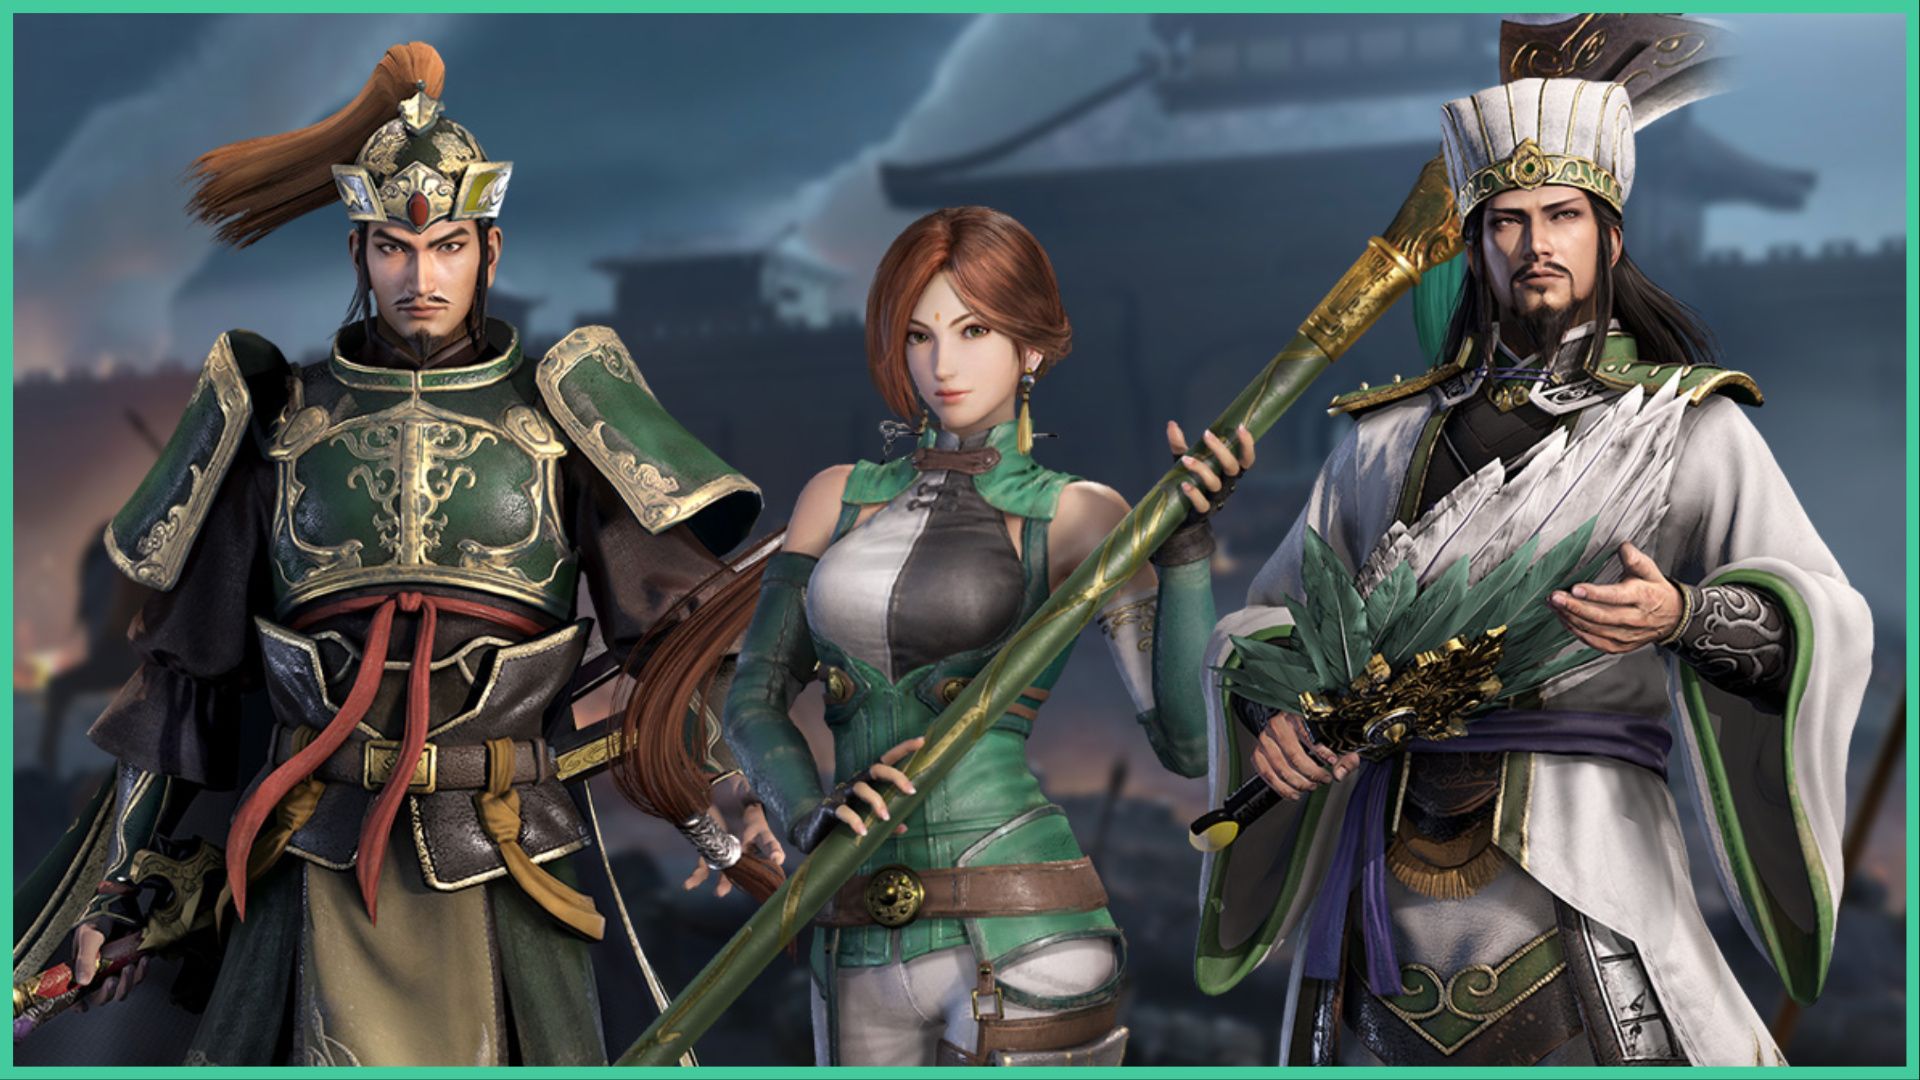 feature image for our dynasty warriors m tier list, the image features promo art of three characters from the game, with one female in the middle holding a sharp weapon, the image in the background is of traditional style buildings that are slightly blurred as the characters take the forefront